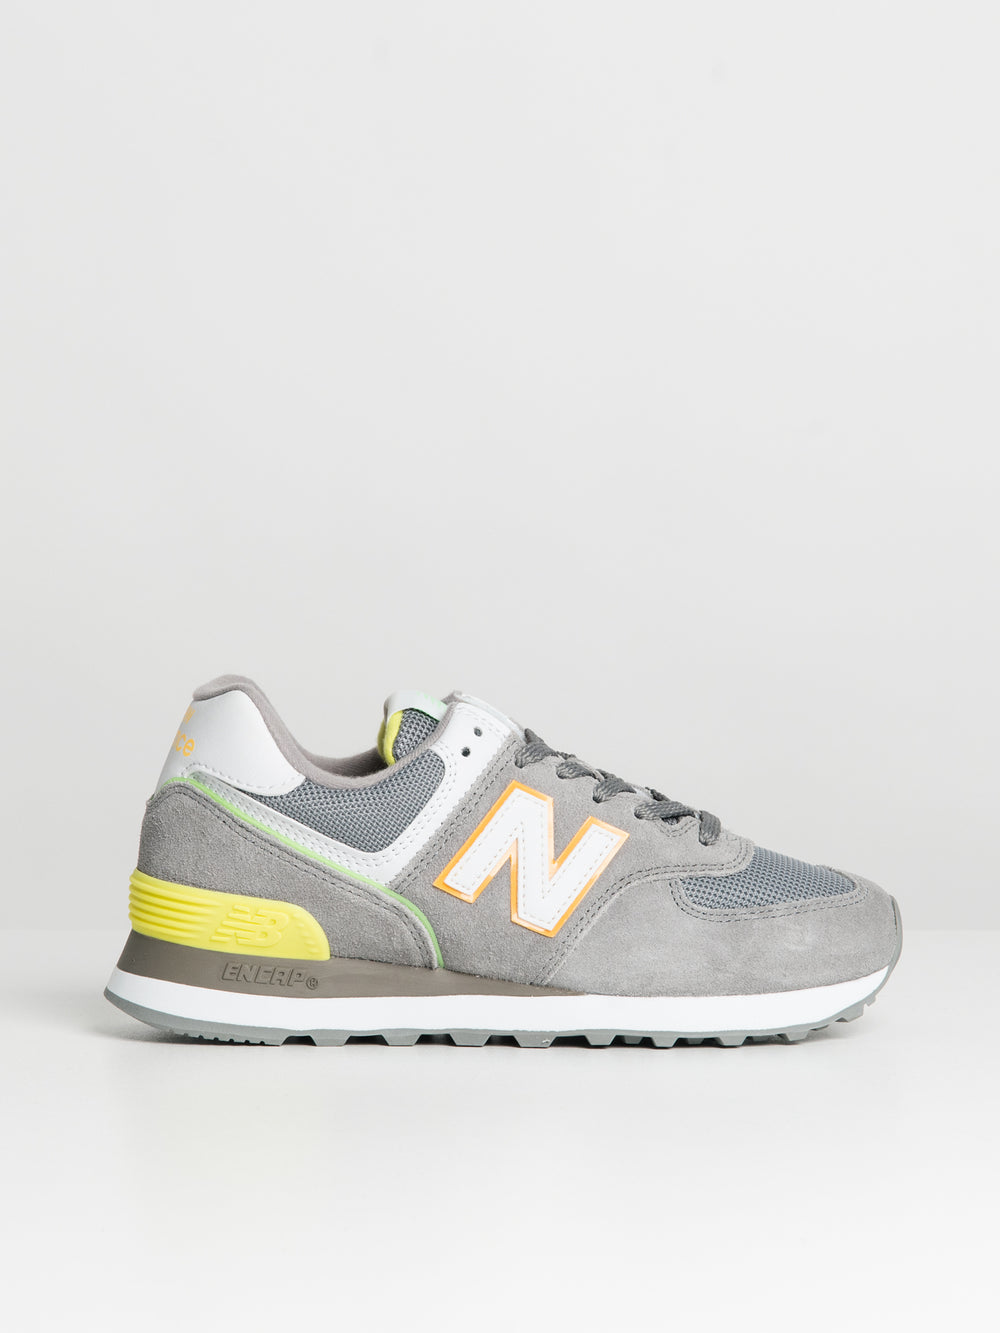 WOMENS NEW BALANCE THE 574 SNEAKERS - CLEARANCE